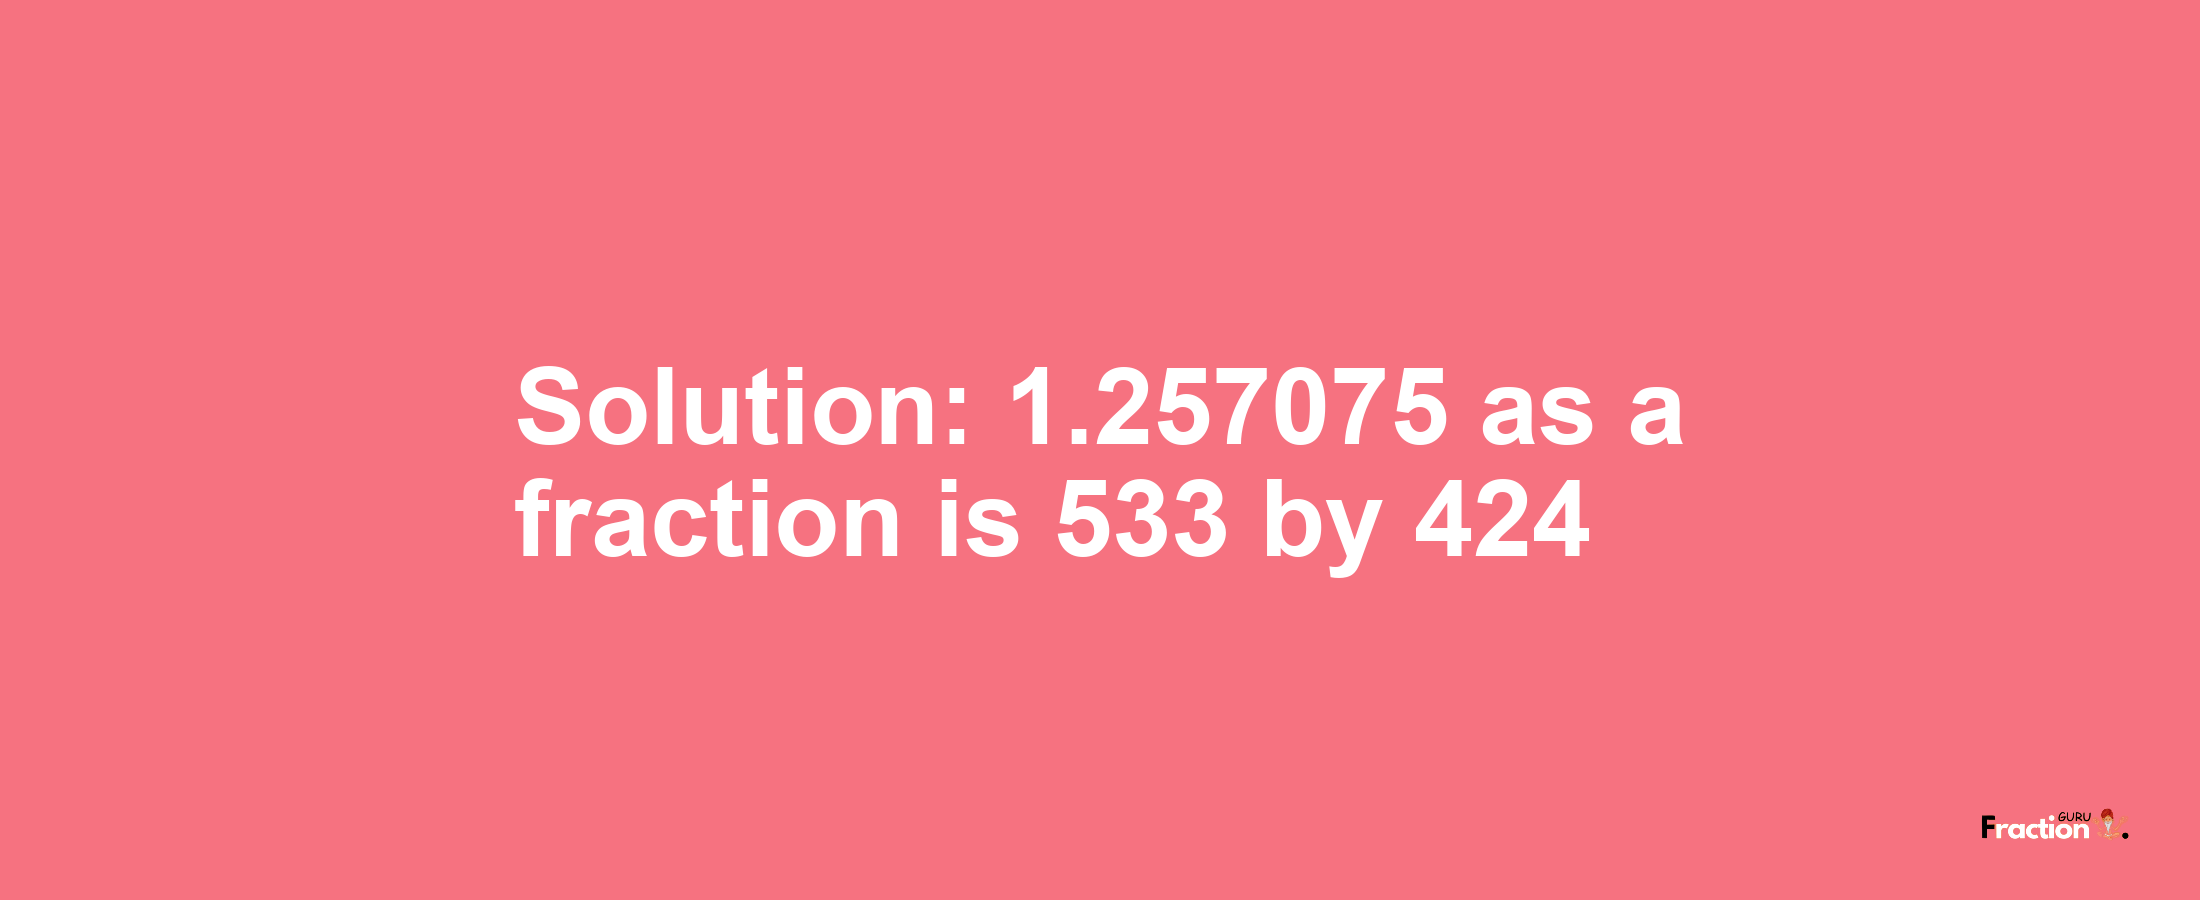 Solution:1.257075 as a fraction is 533/424